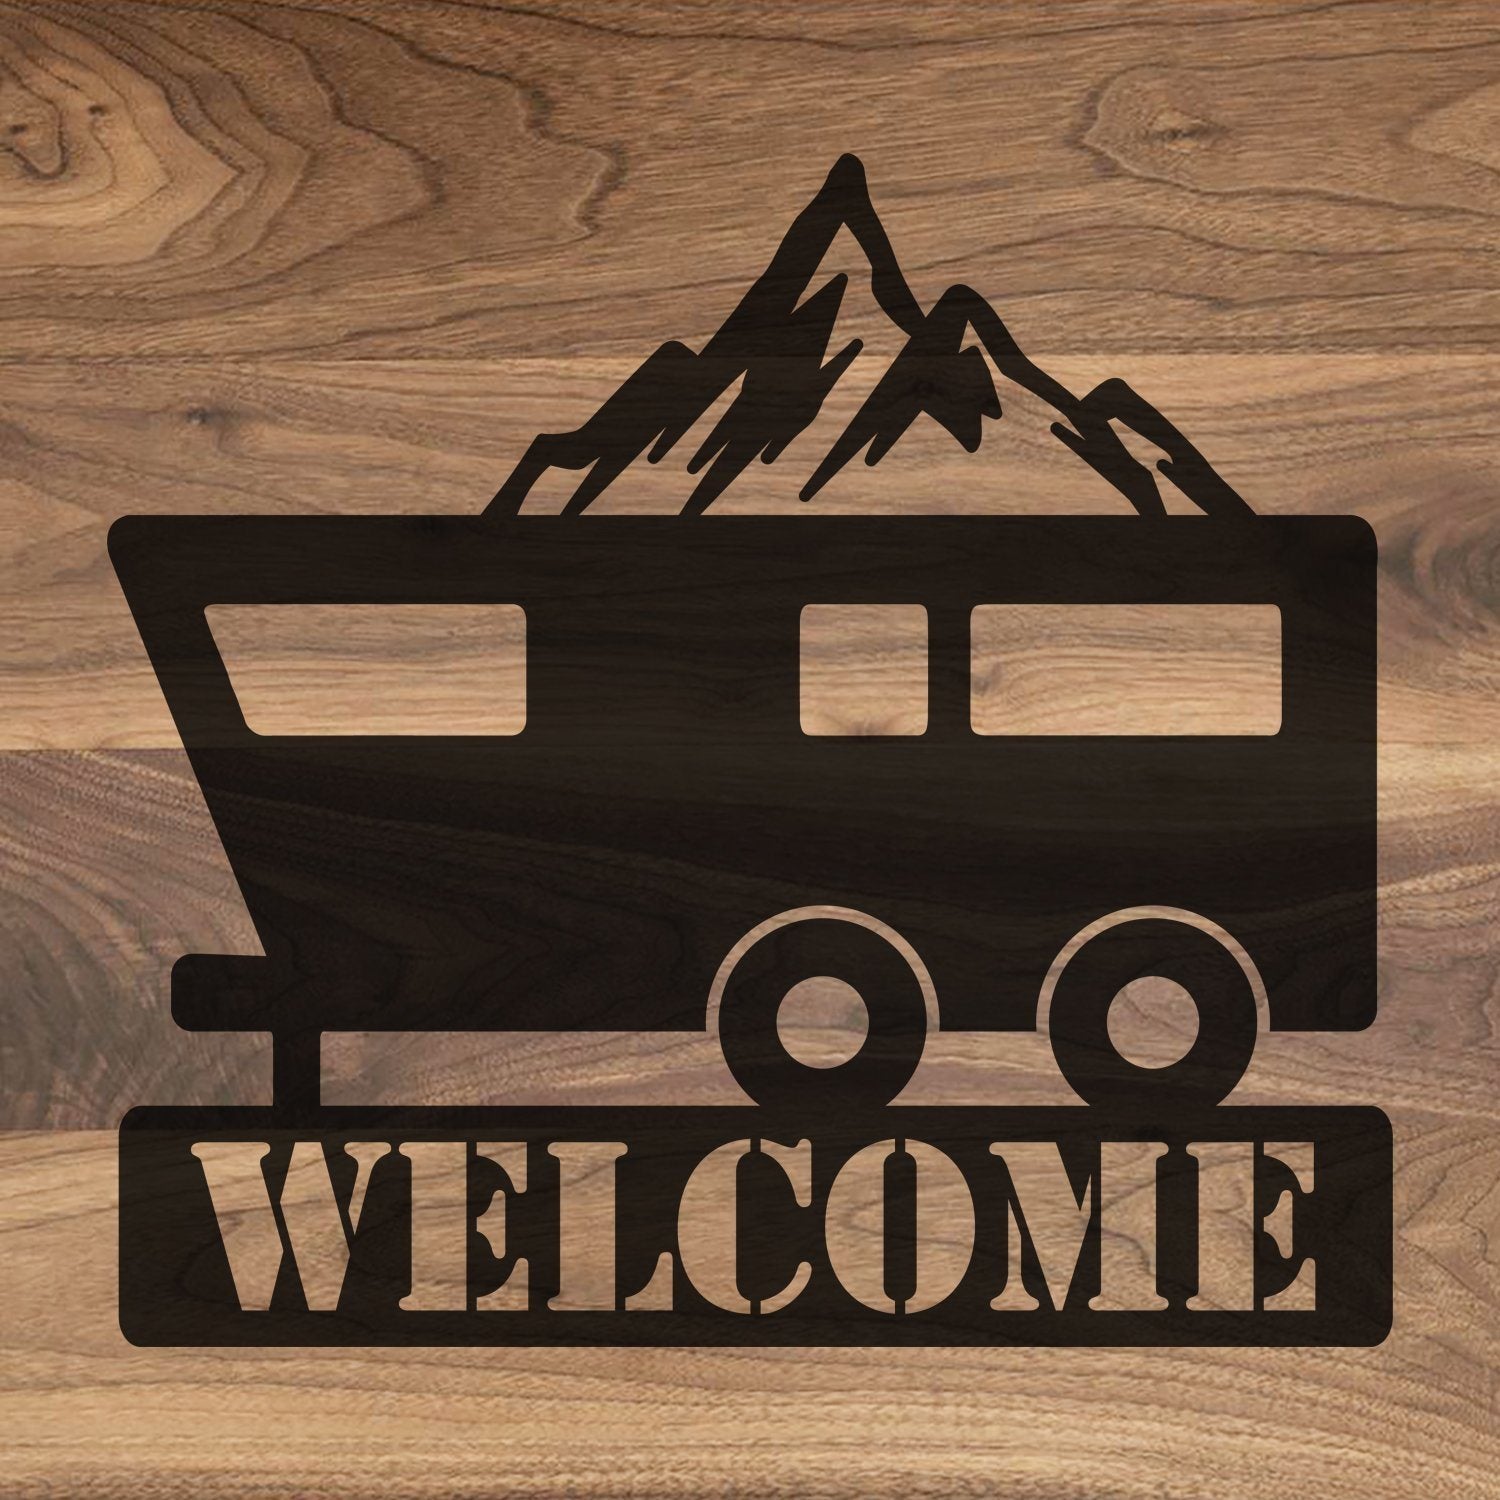 Personalized Cutting Board, Custom Cutting Board, RV Cutting Board,  Personalized RV Cutting Board, Van Life, Road Trip, Tiny Home 118 